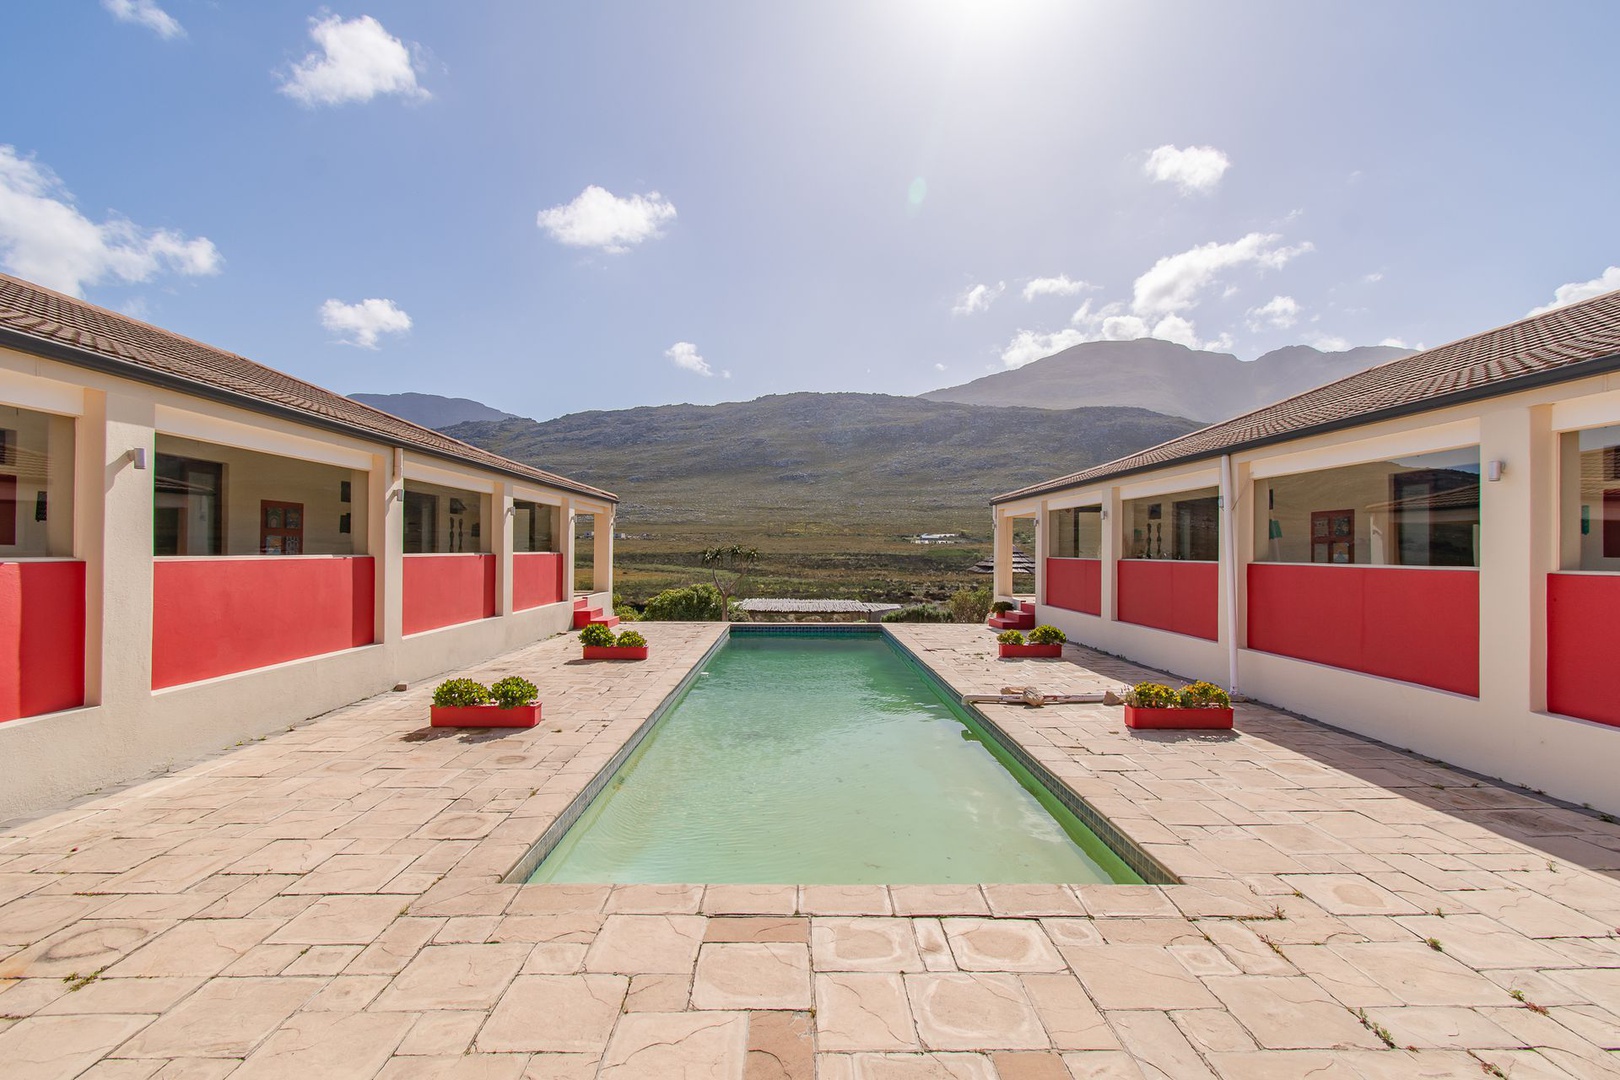 House in Pringle Bay Rural - All rooms face the pool on one side